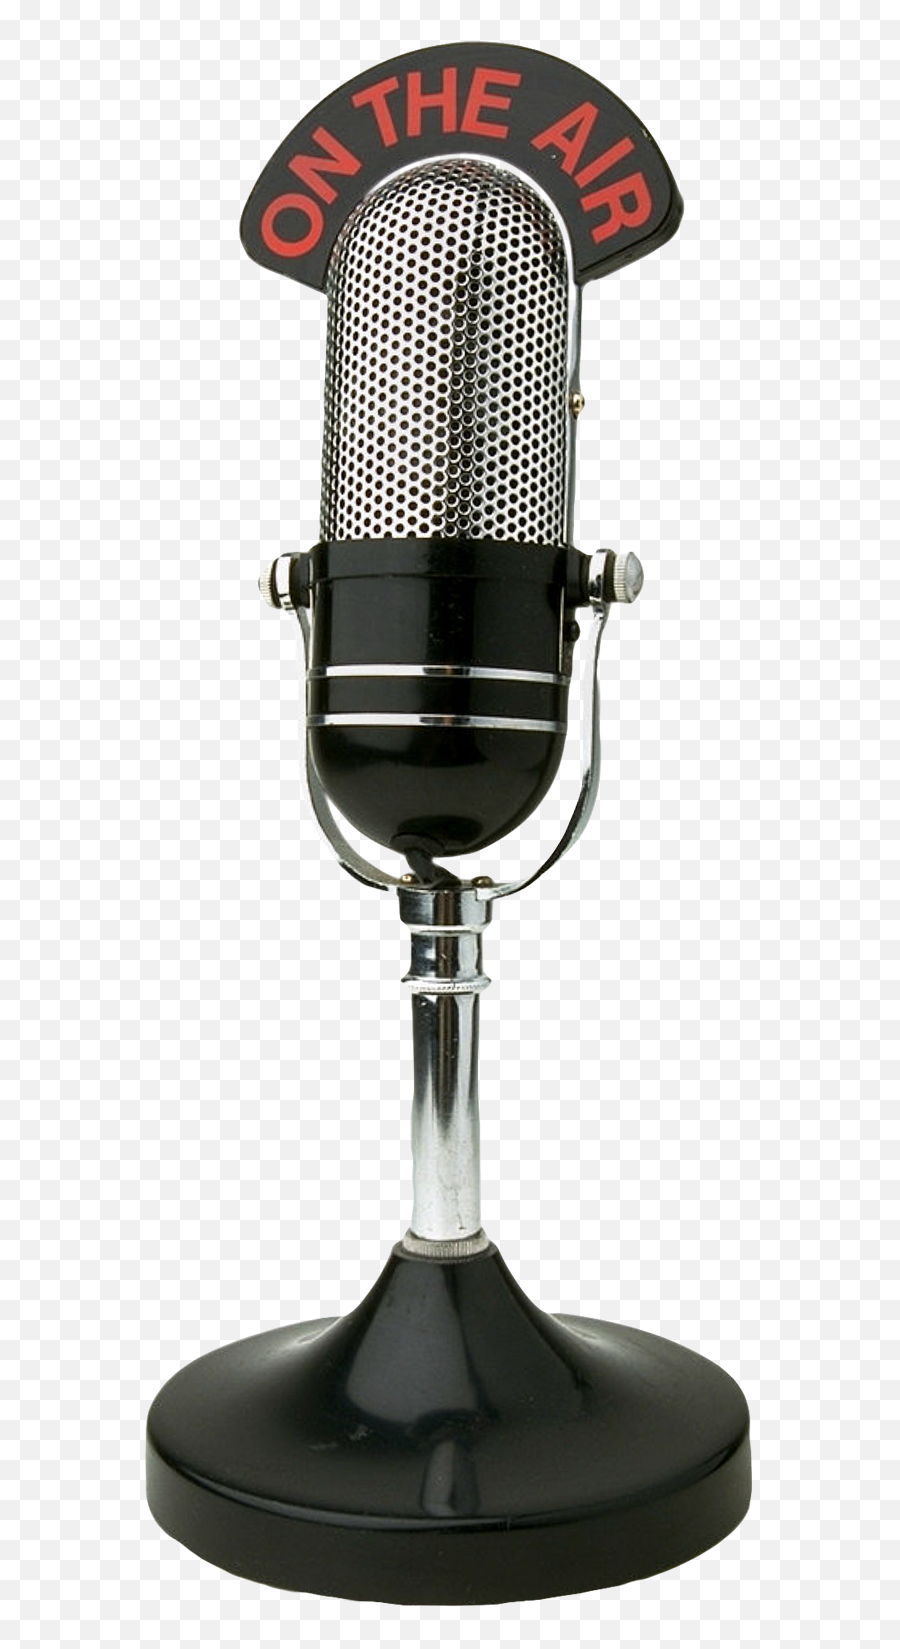 Microphone Png Transparent Image - Real On Air Microphone Transparent Emoji,Microphone Transparent